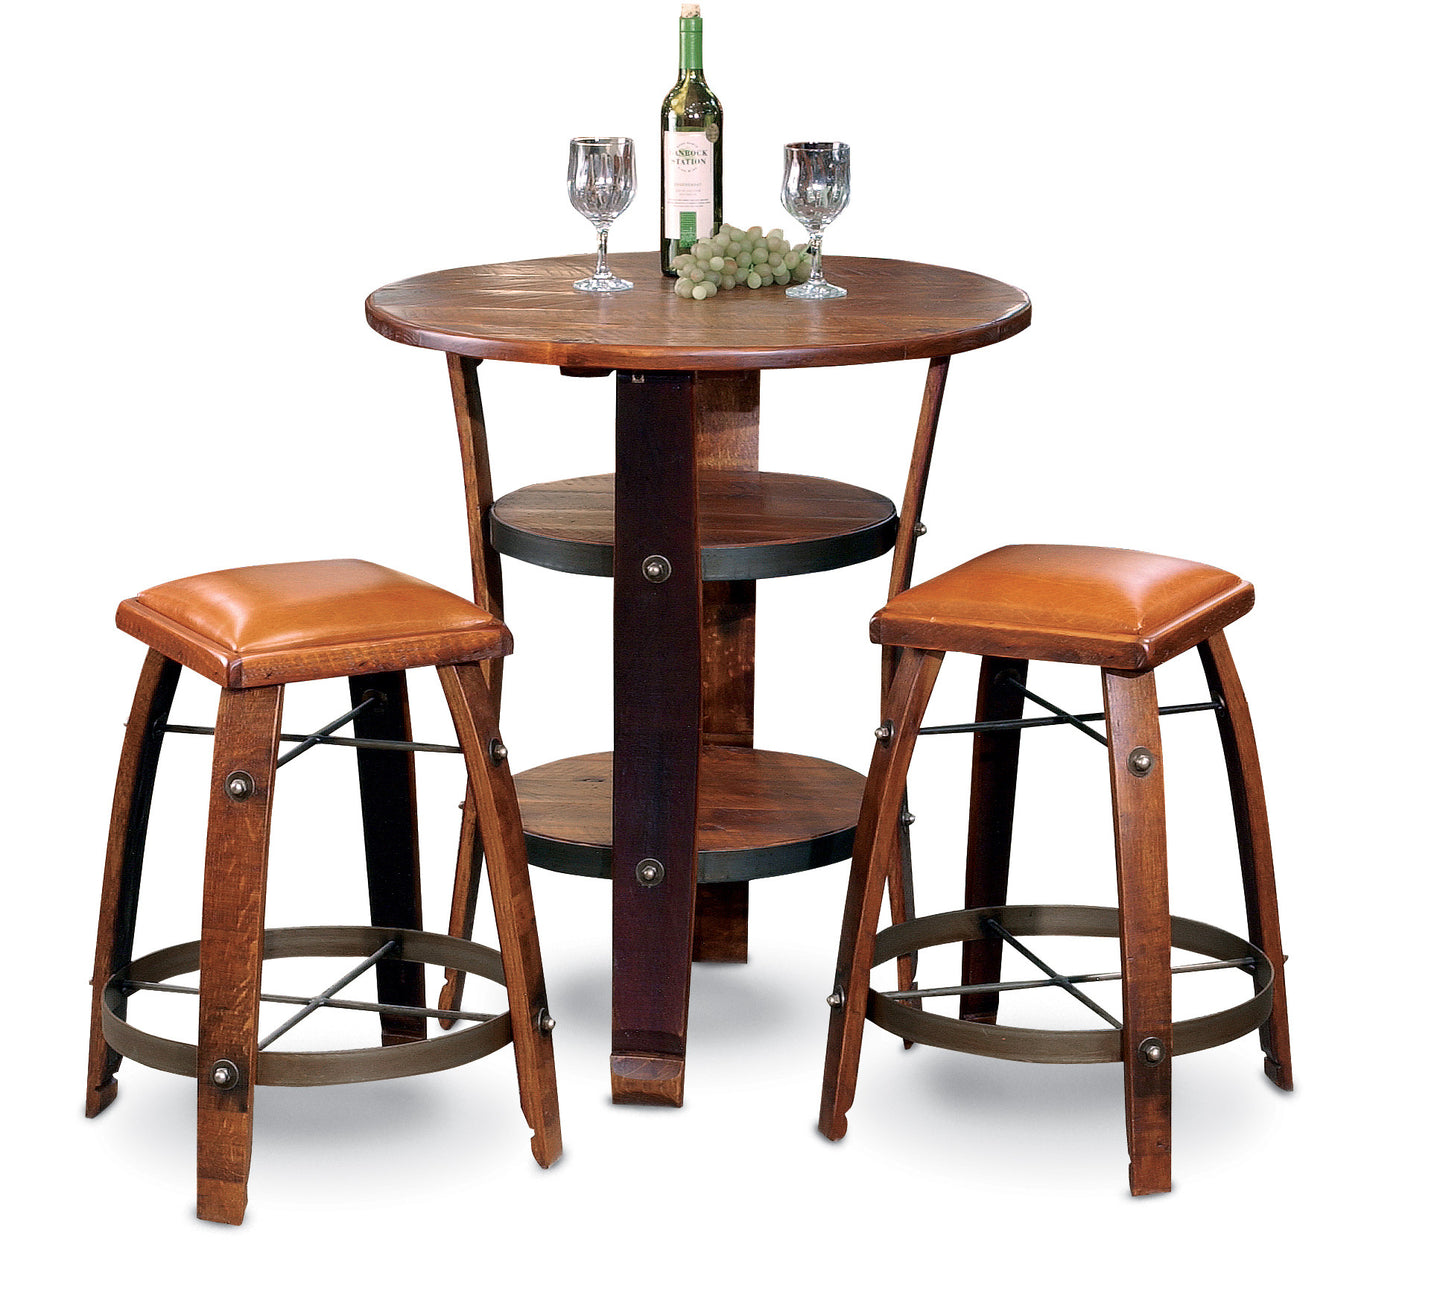 Wine Barrel Stave Stool Tan Leather 24 By 2 Day Designs 818t24 The